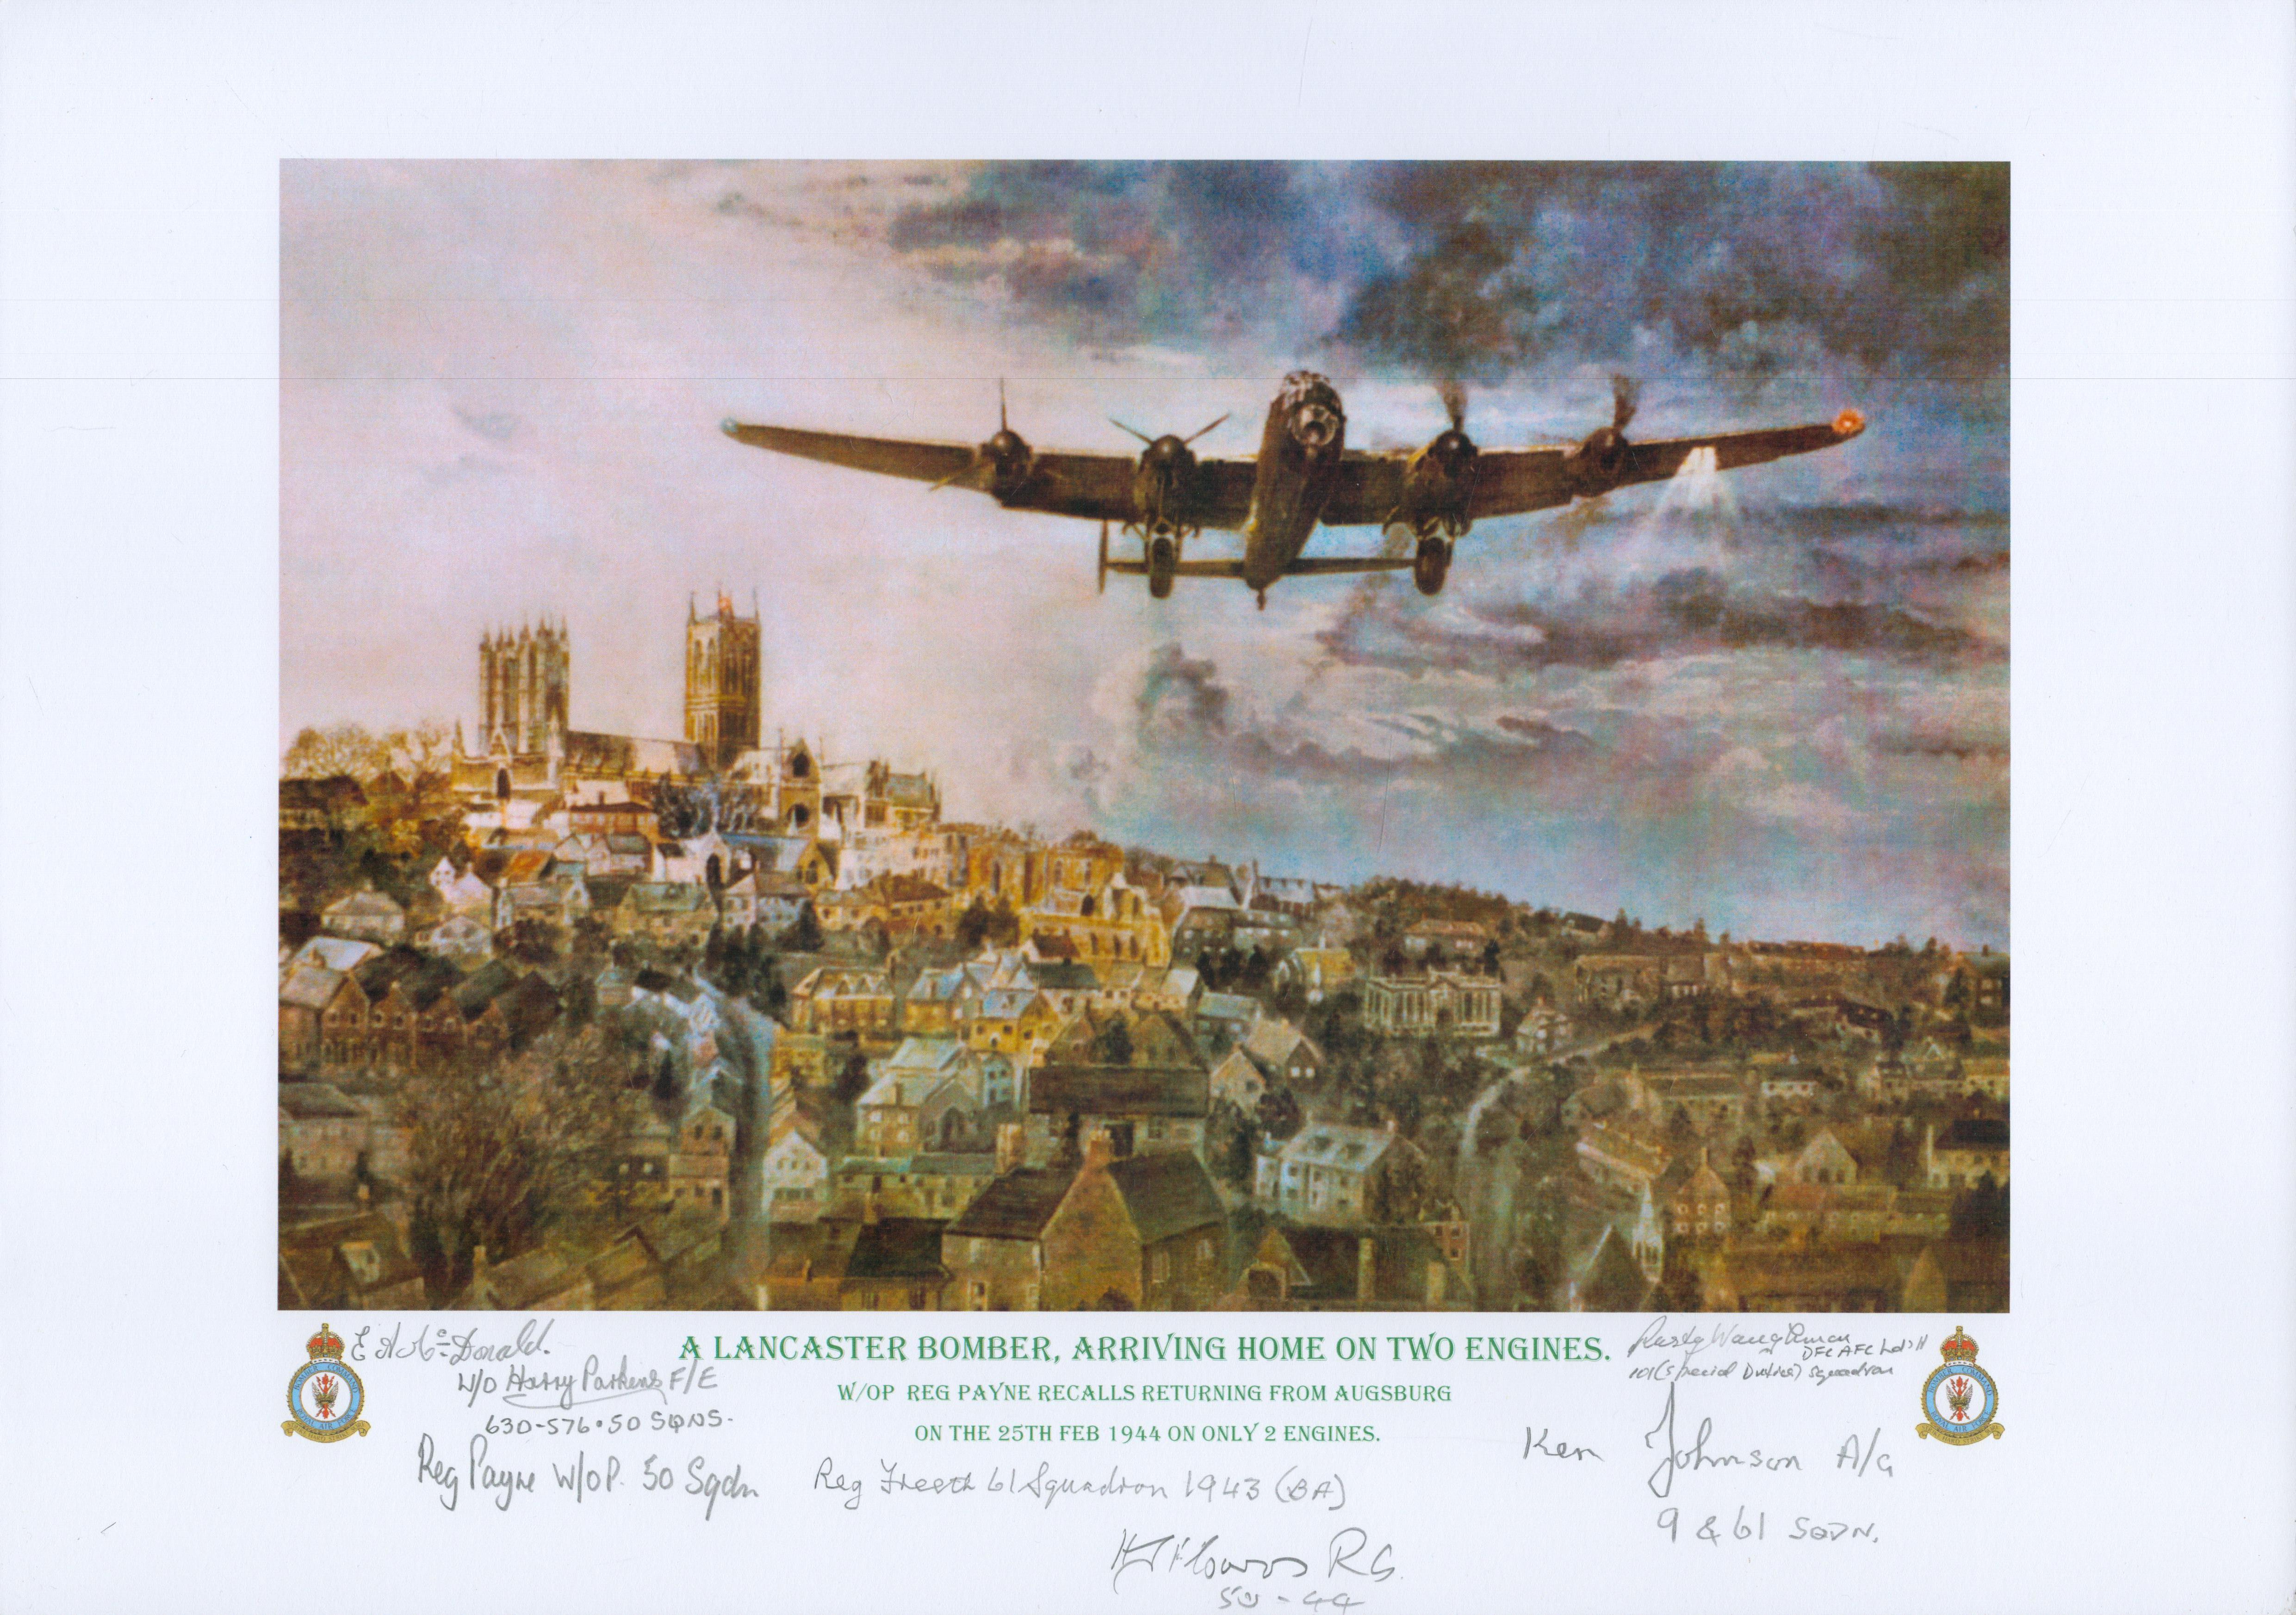 A Lancaster bomber, arriving home on two engines print by Reg Payne. Signed by 6 including Donald,